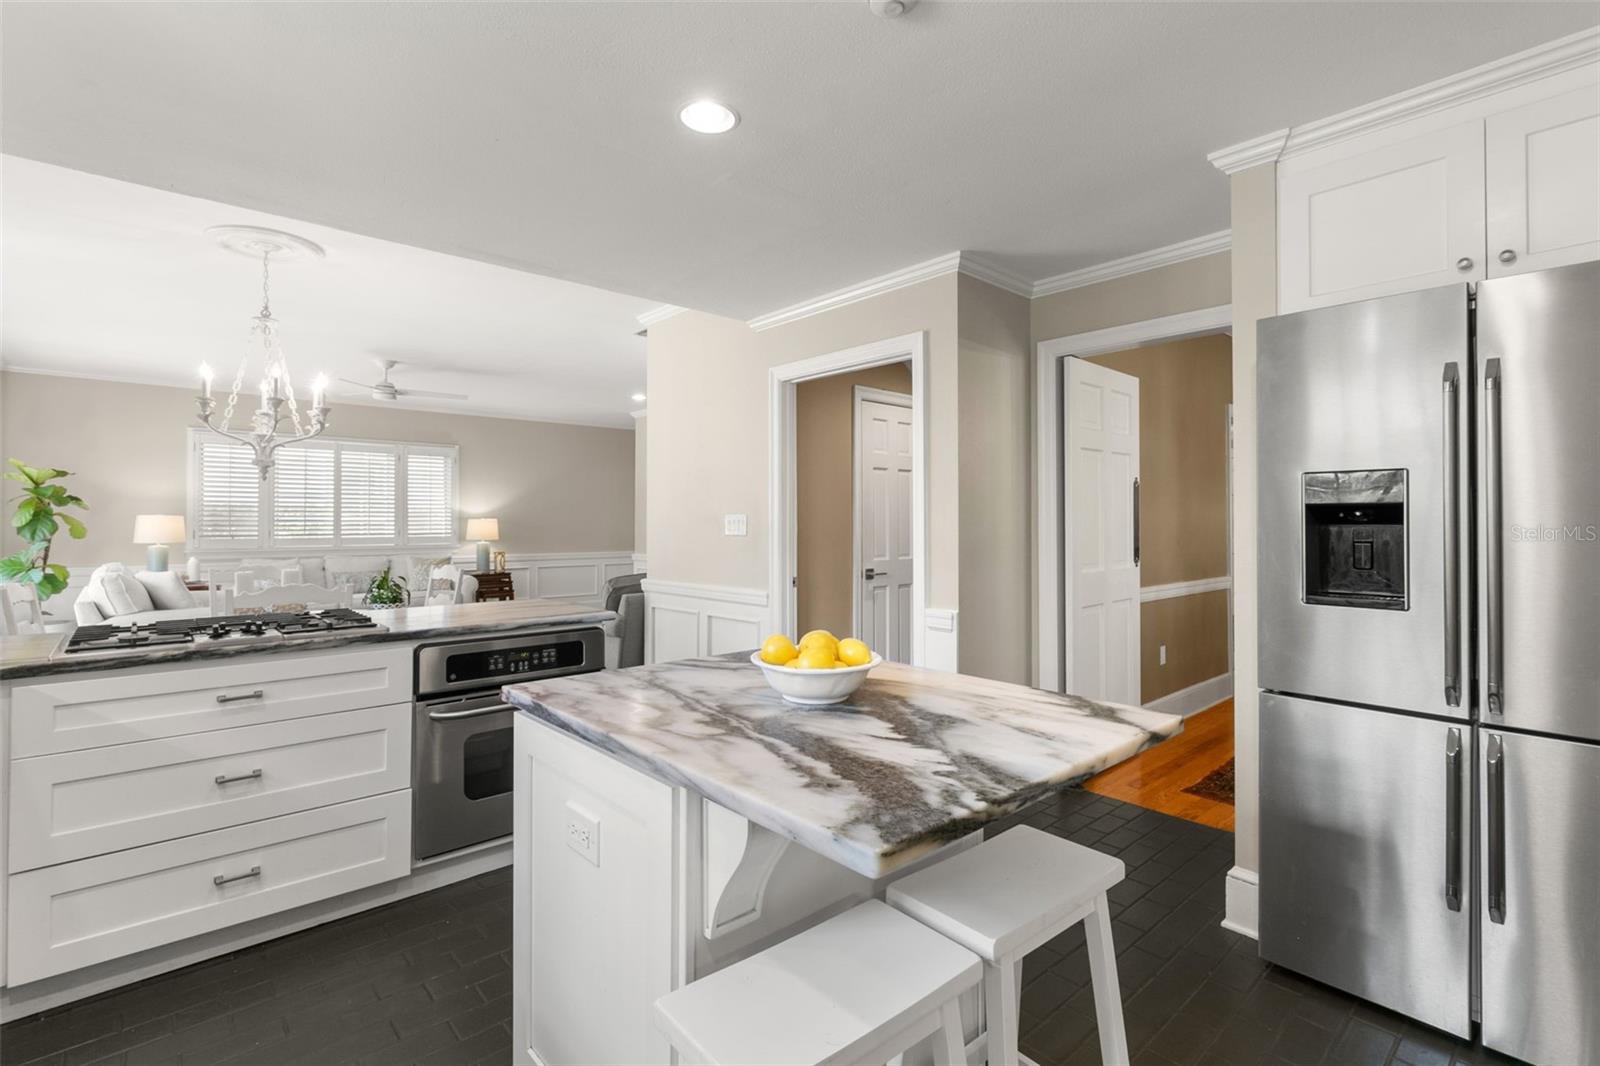 Kitchen includes island, stainless steel appliances, gas stove, and plenty of storage